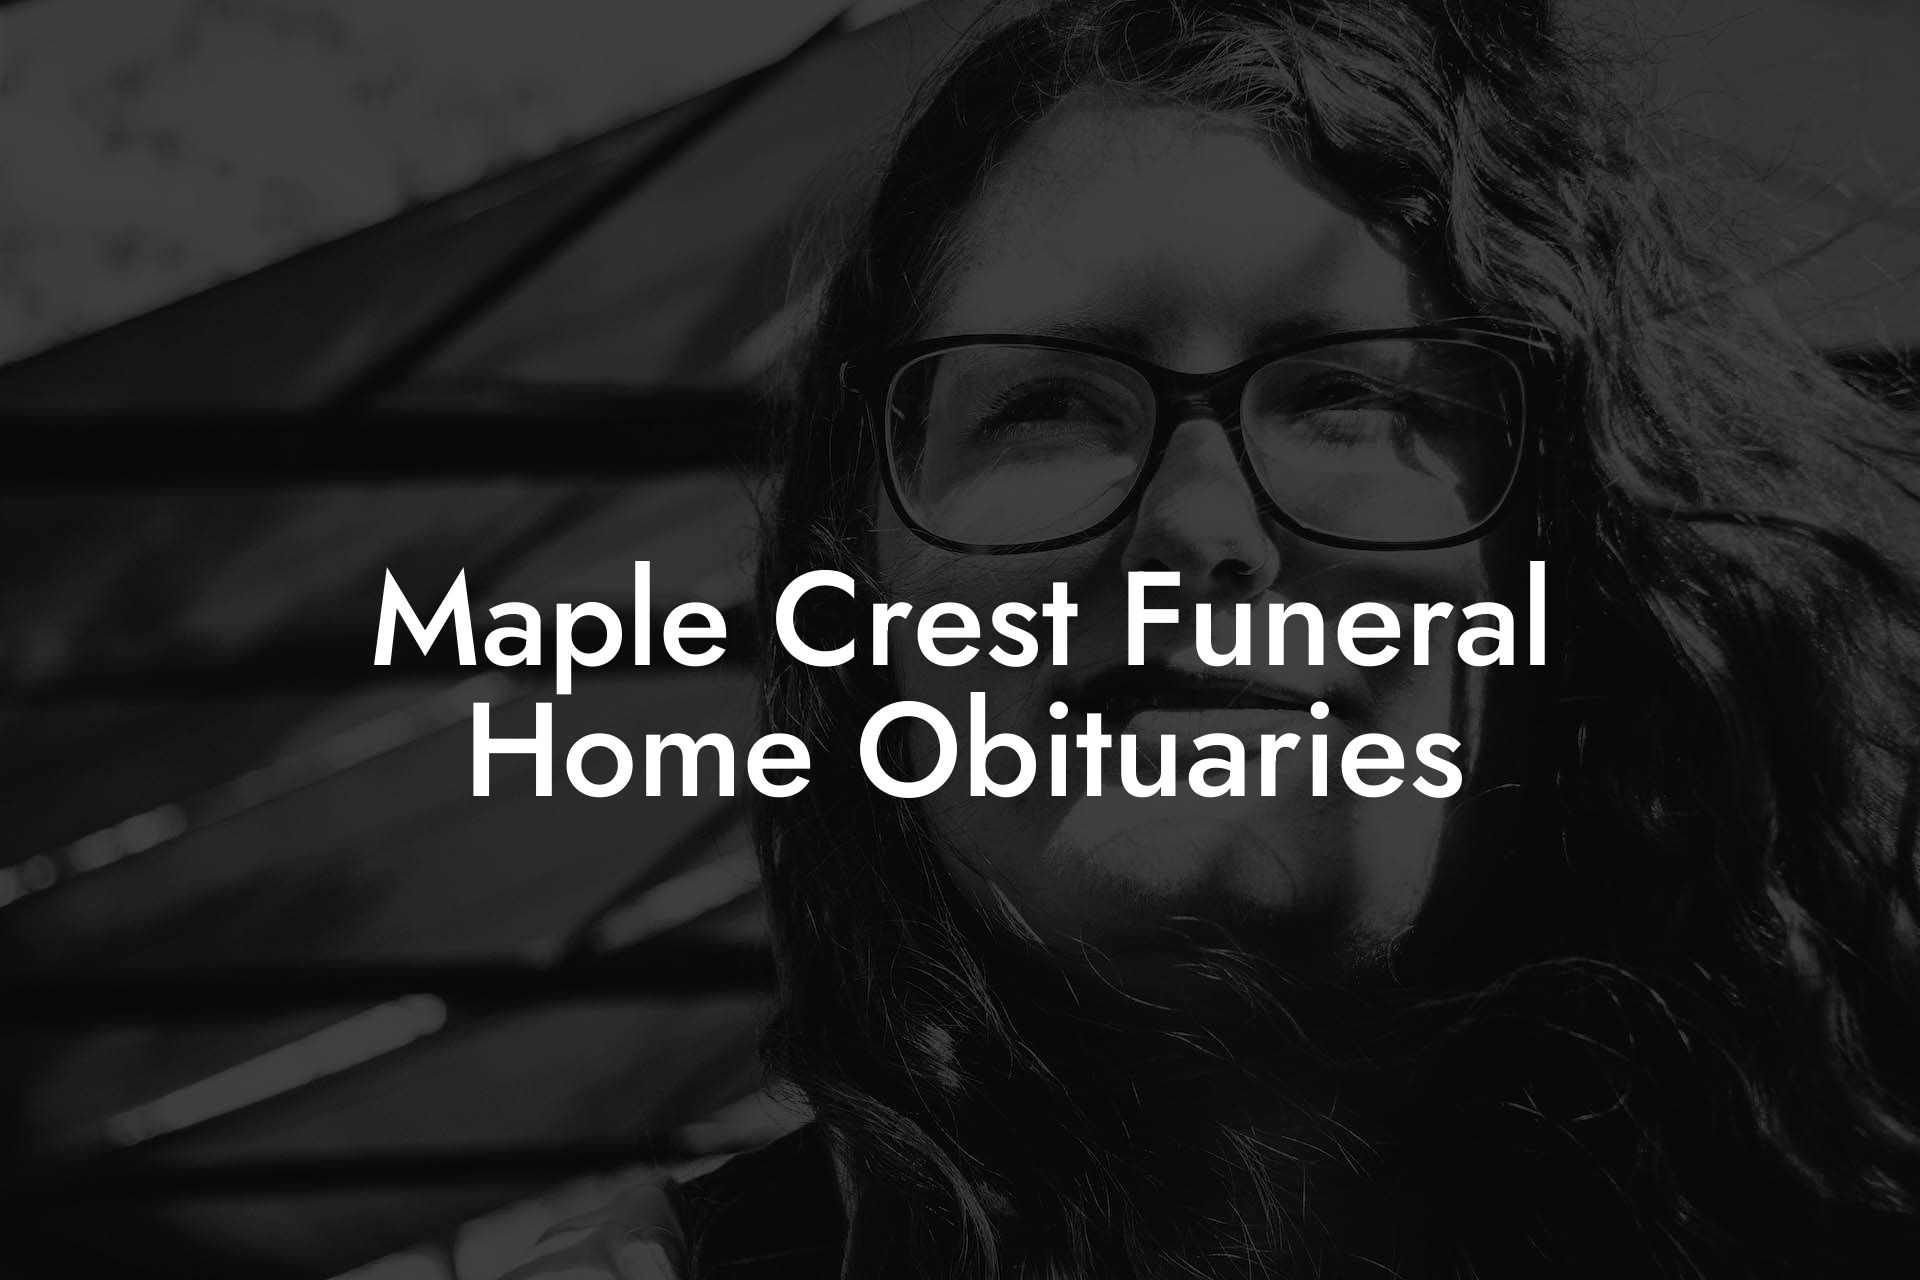 Maple Crest Funeral Home Obituaries